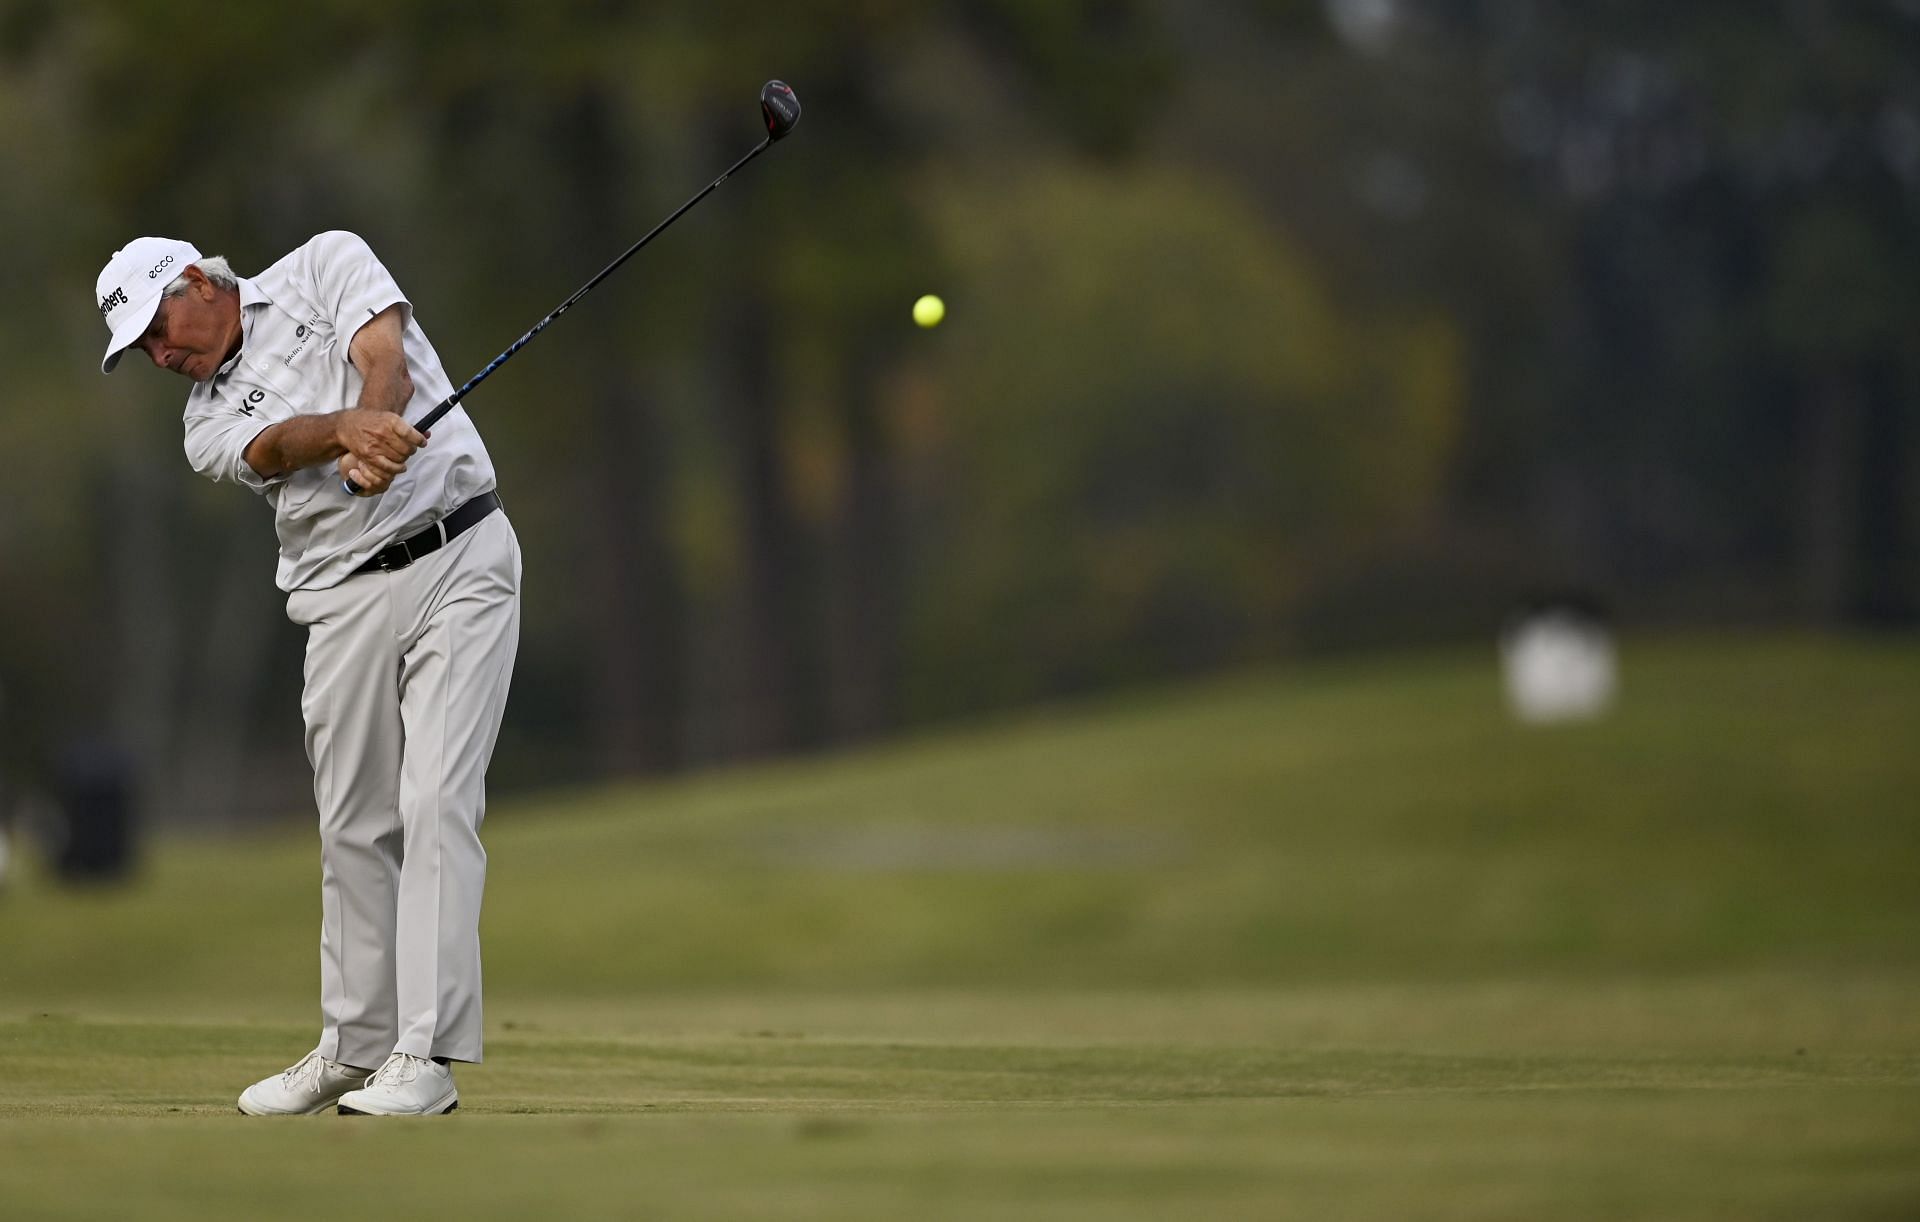 Fred Couples with a yellow ball at the SAS Championship (Image via Eakin Howard/Getty Images)